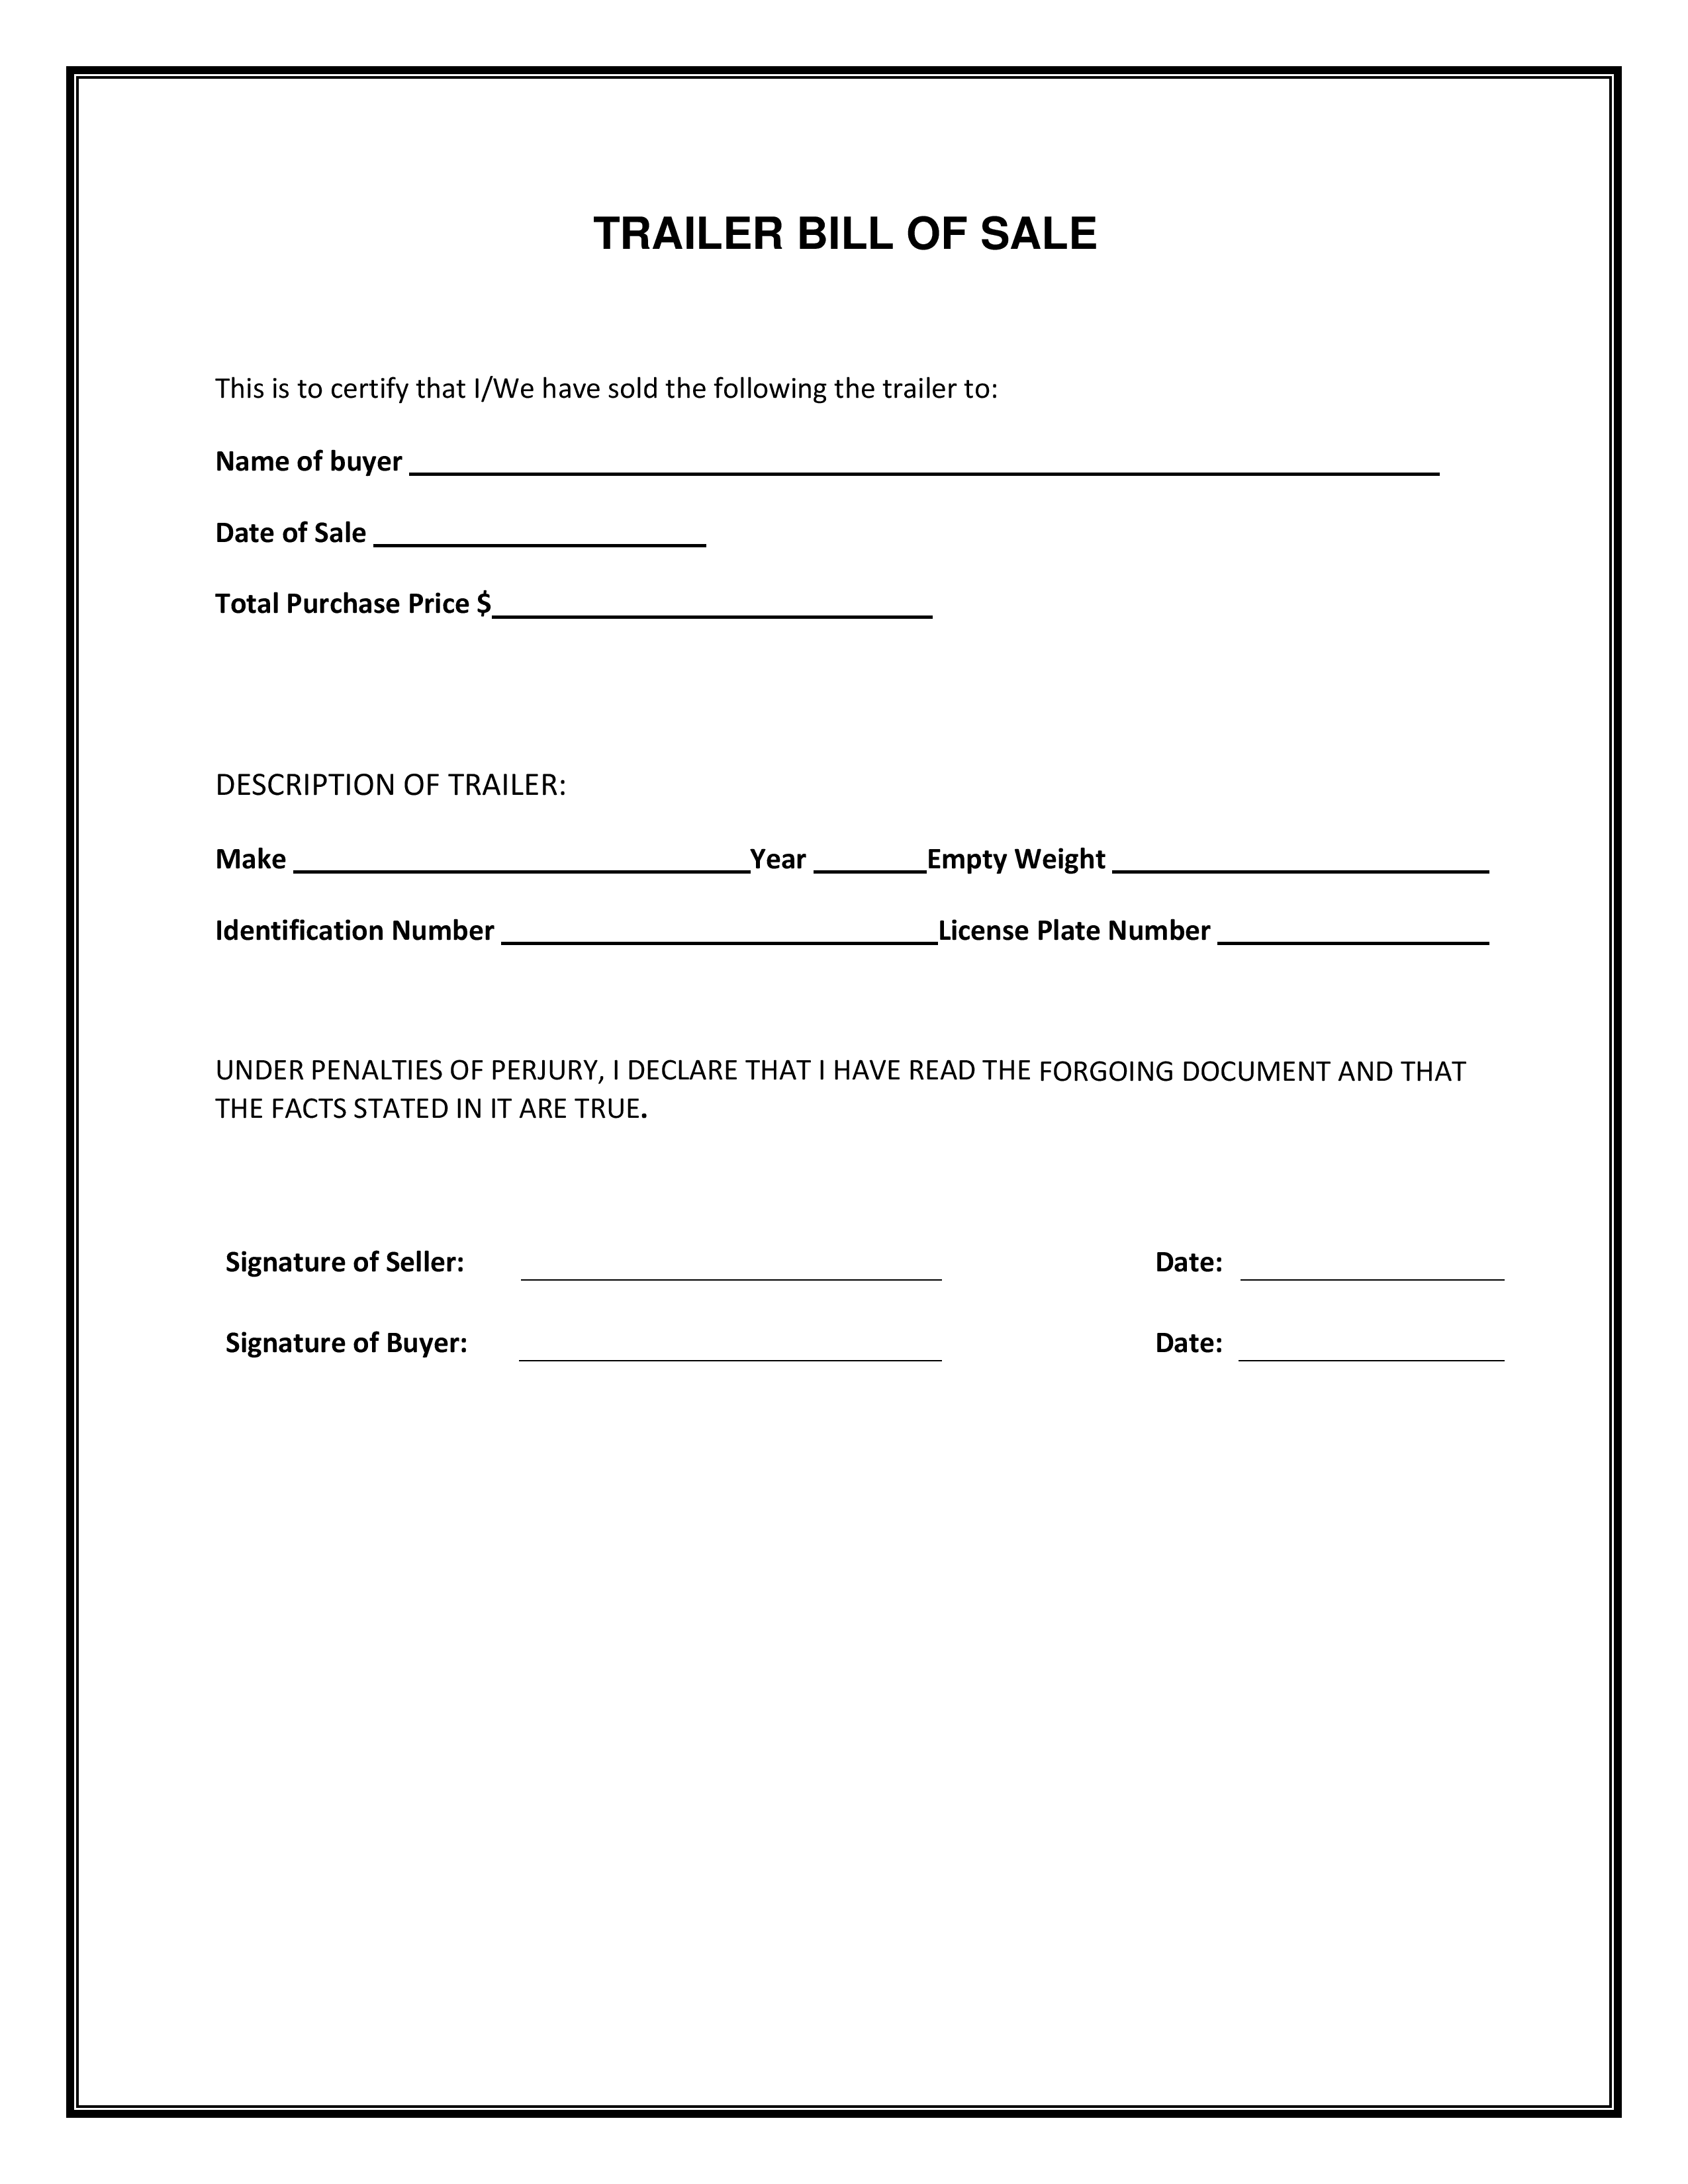 free-trailer-bill-of-sale-form-pdf-template-form-download